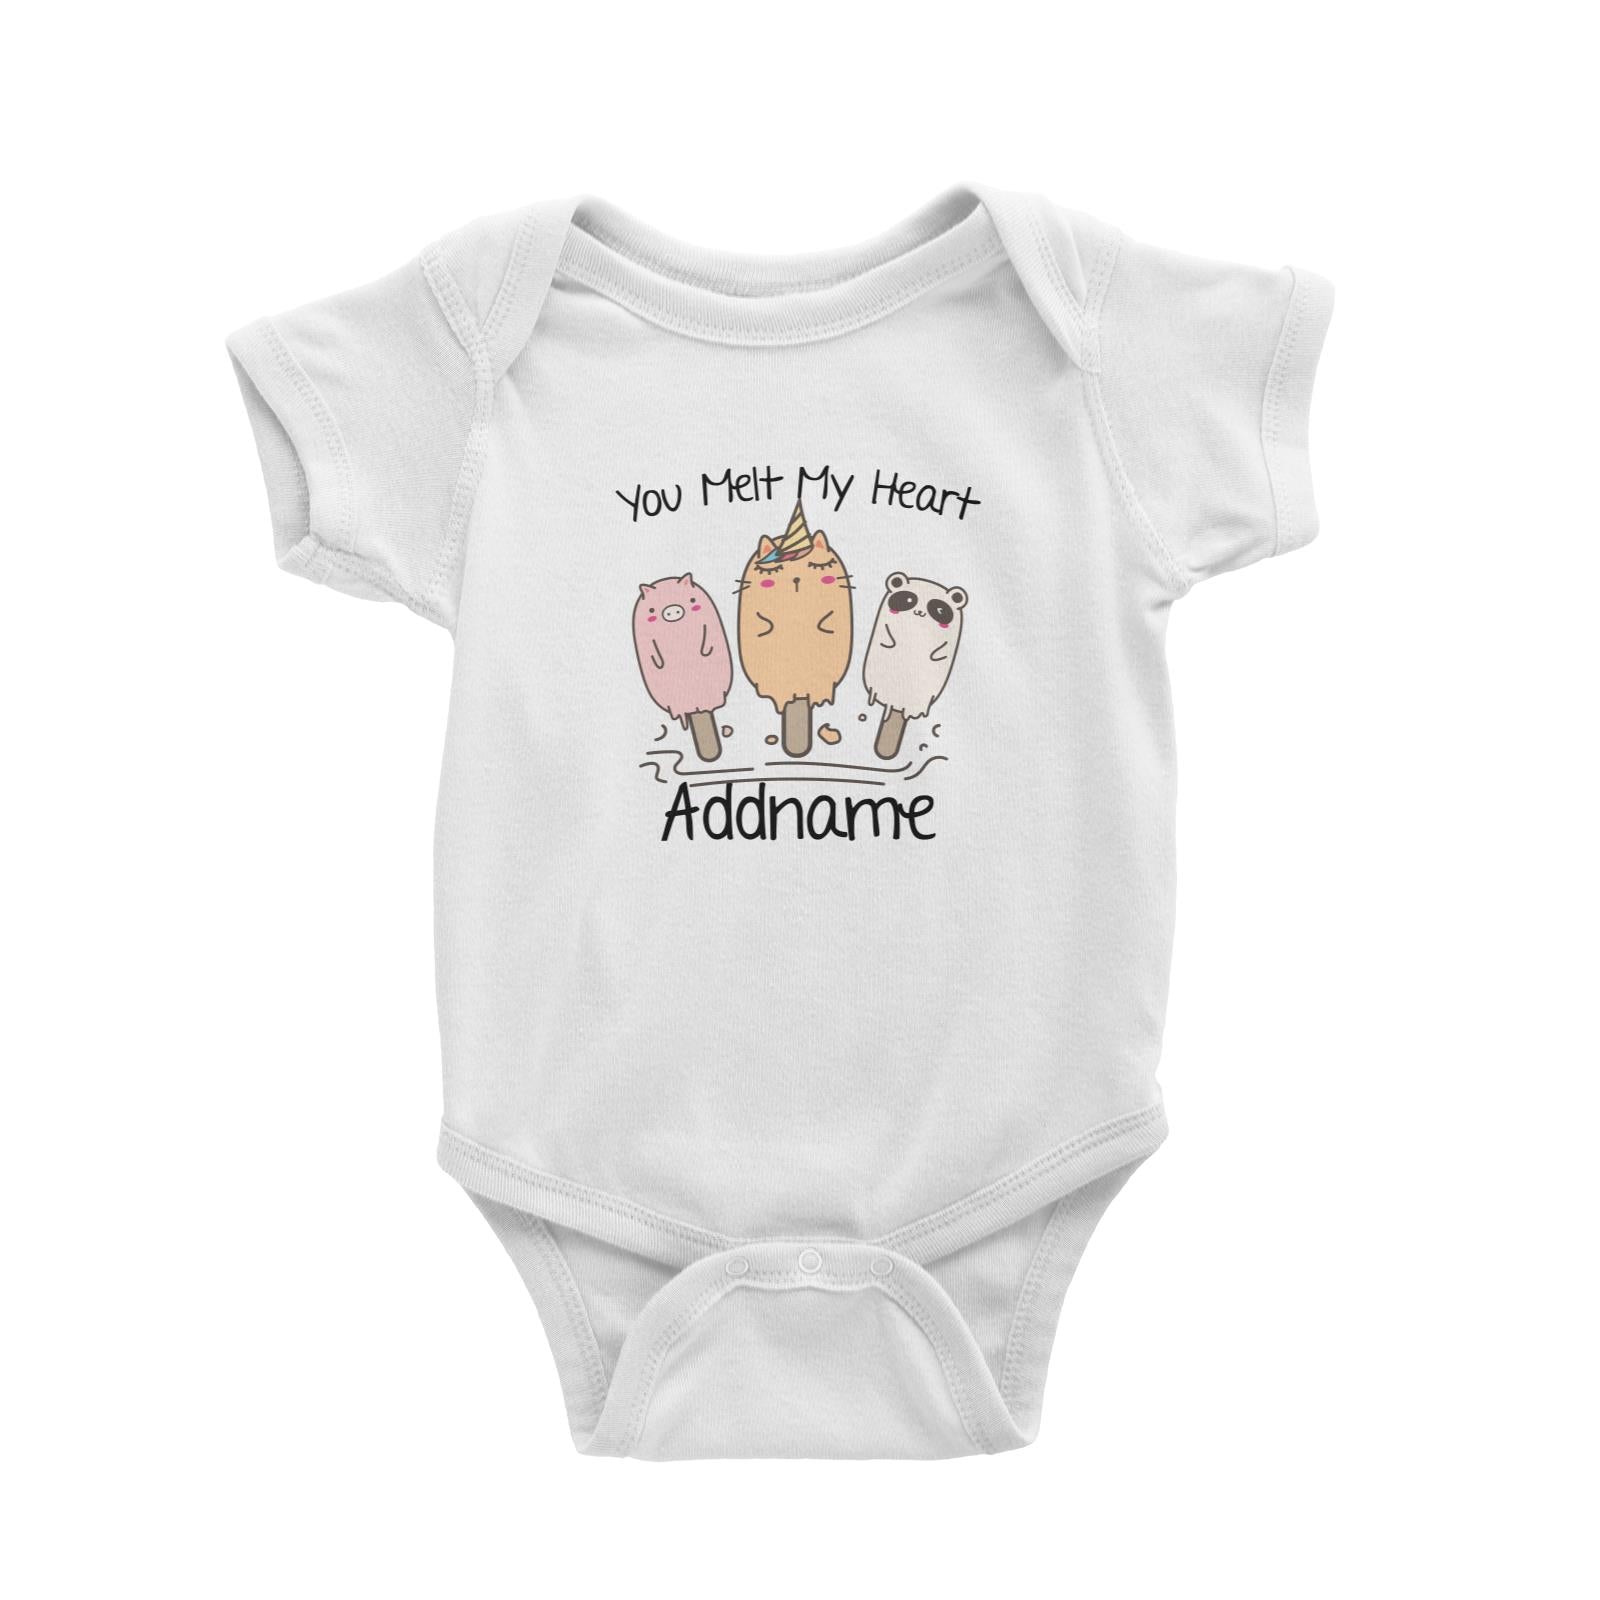 Cute Animals And Friends Series You Melt My Heart Animal Addname Baby Romper